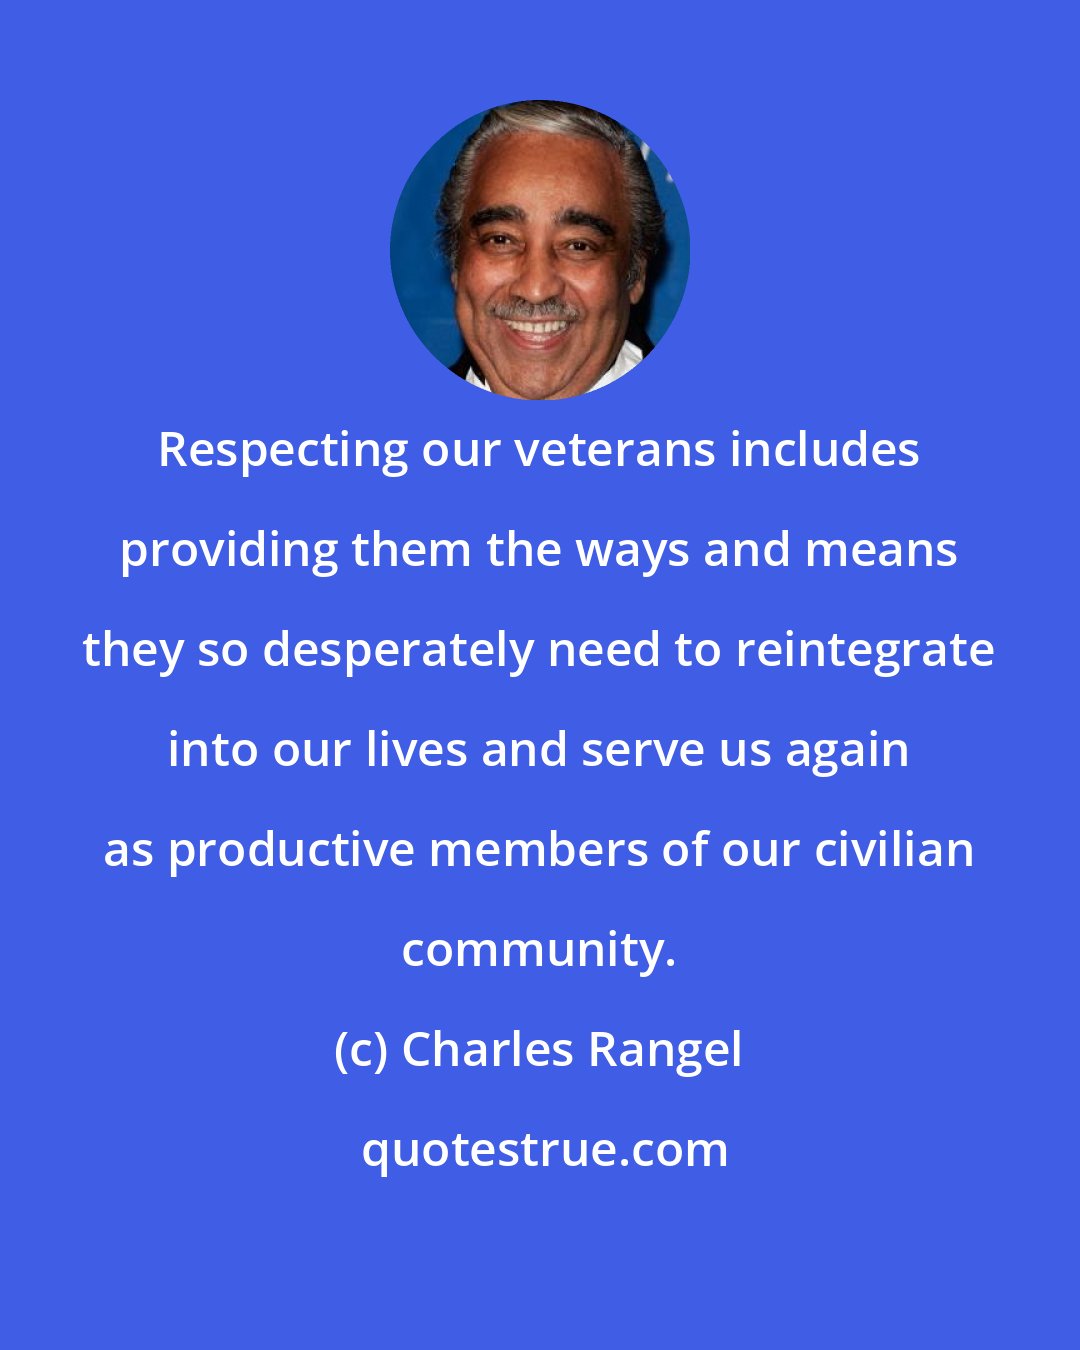 Charles Rangel: Respecting our veterans includes providing them the ways and means they so desperately need to reintegrate into our lives and serve us again as productive members of our civilian community.